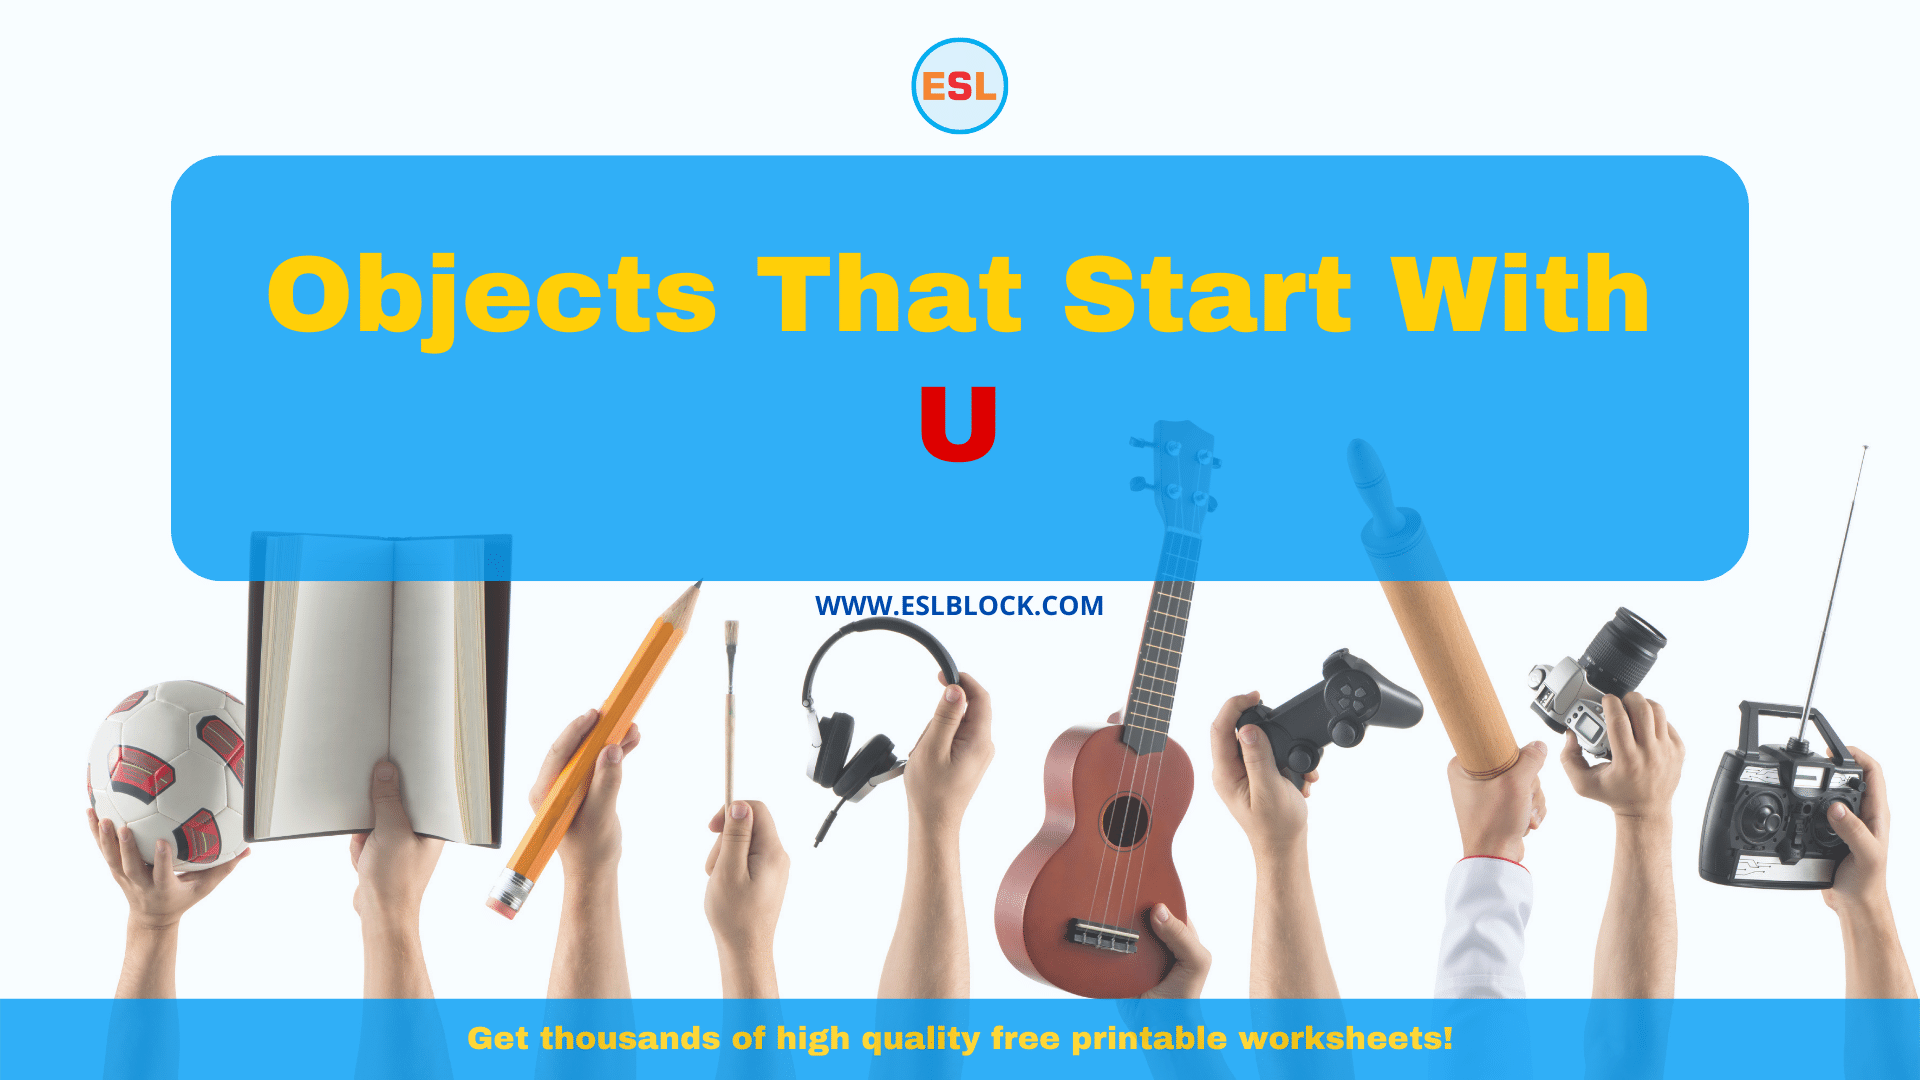 5 Letter Objects Starting With U, English, English Nouns, English Vocabulary, English Words, List of Objects That Start With U, Nouns, Objects List, Objects That Start With U, Things Names, U Objects, U Objects in English, U Objects Names, Vocabulary